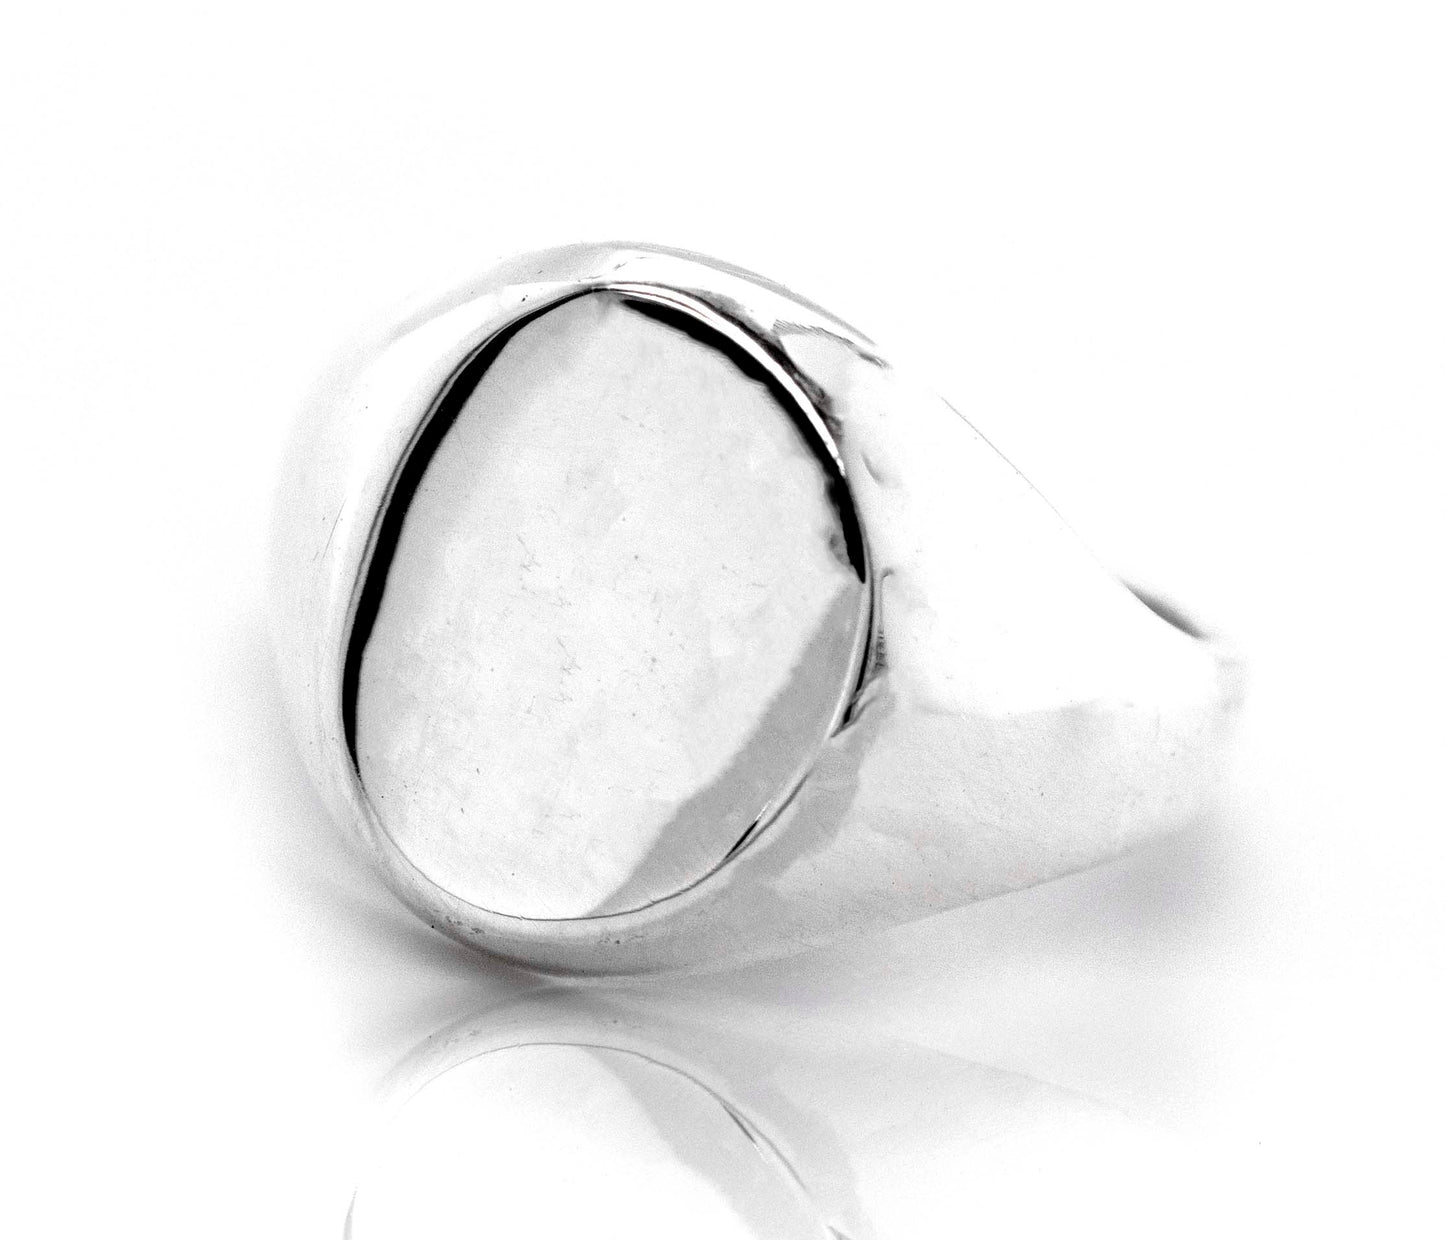 A Super Silver Oval Signet Ring, perfect for everyday wear.